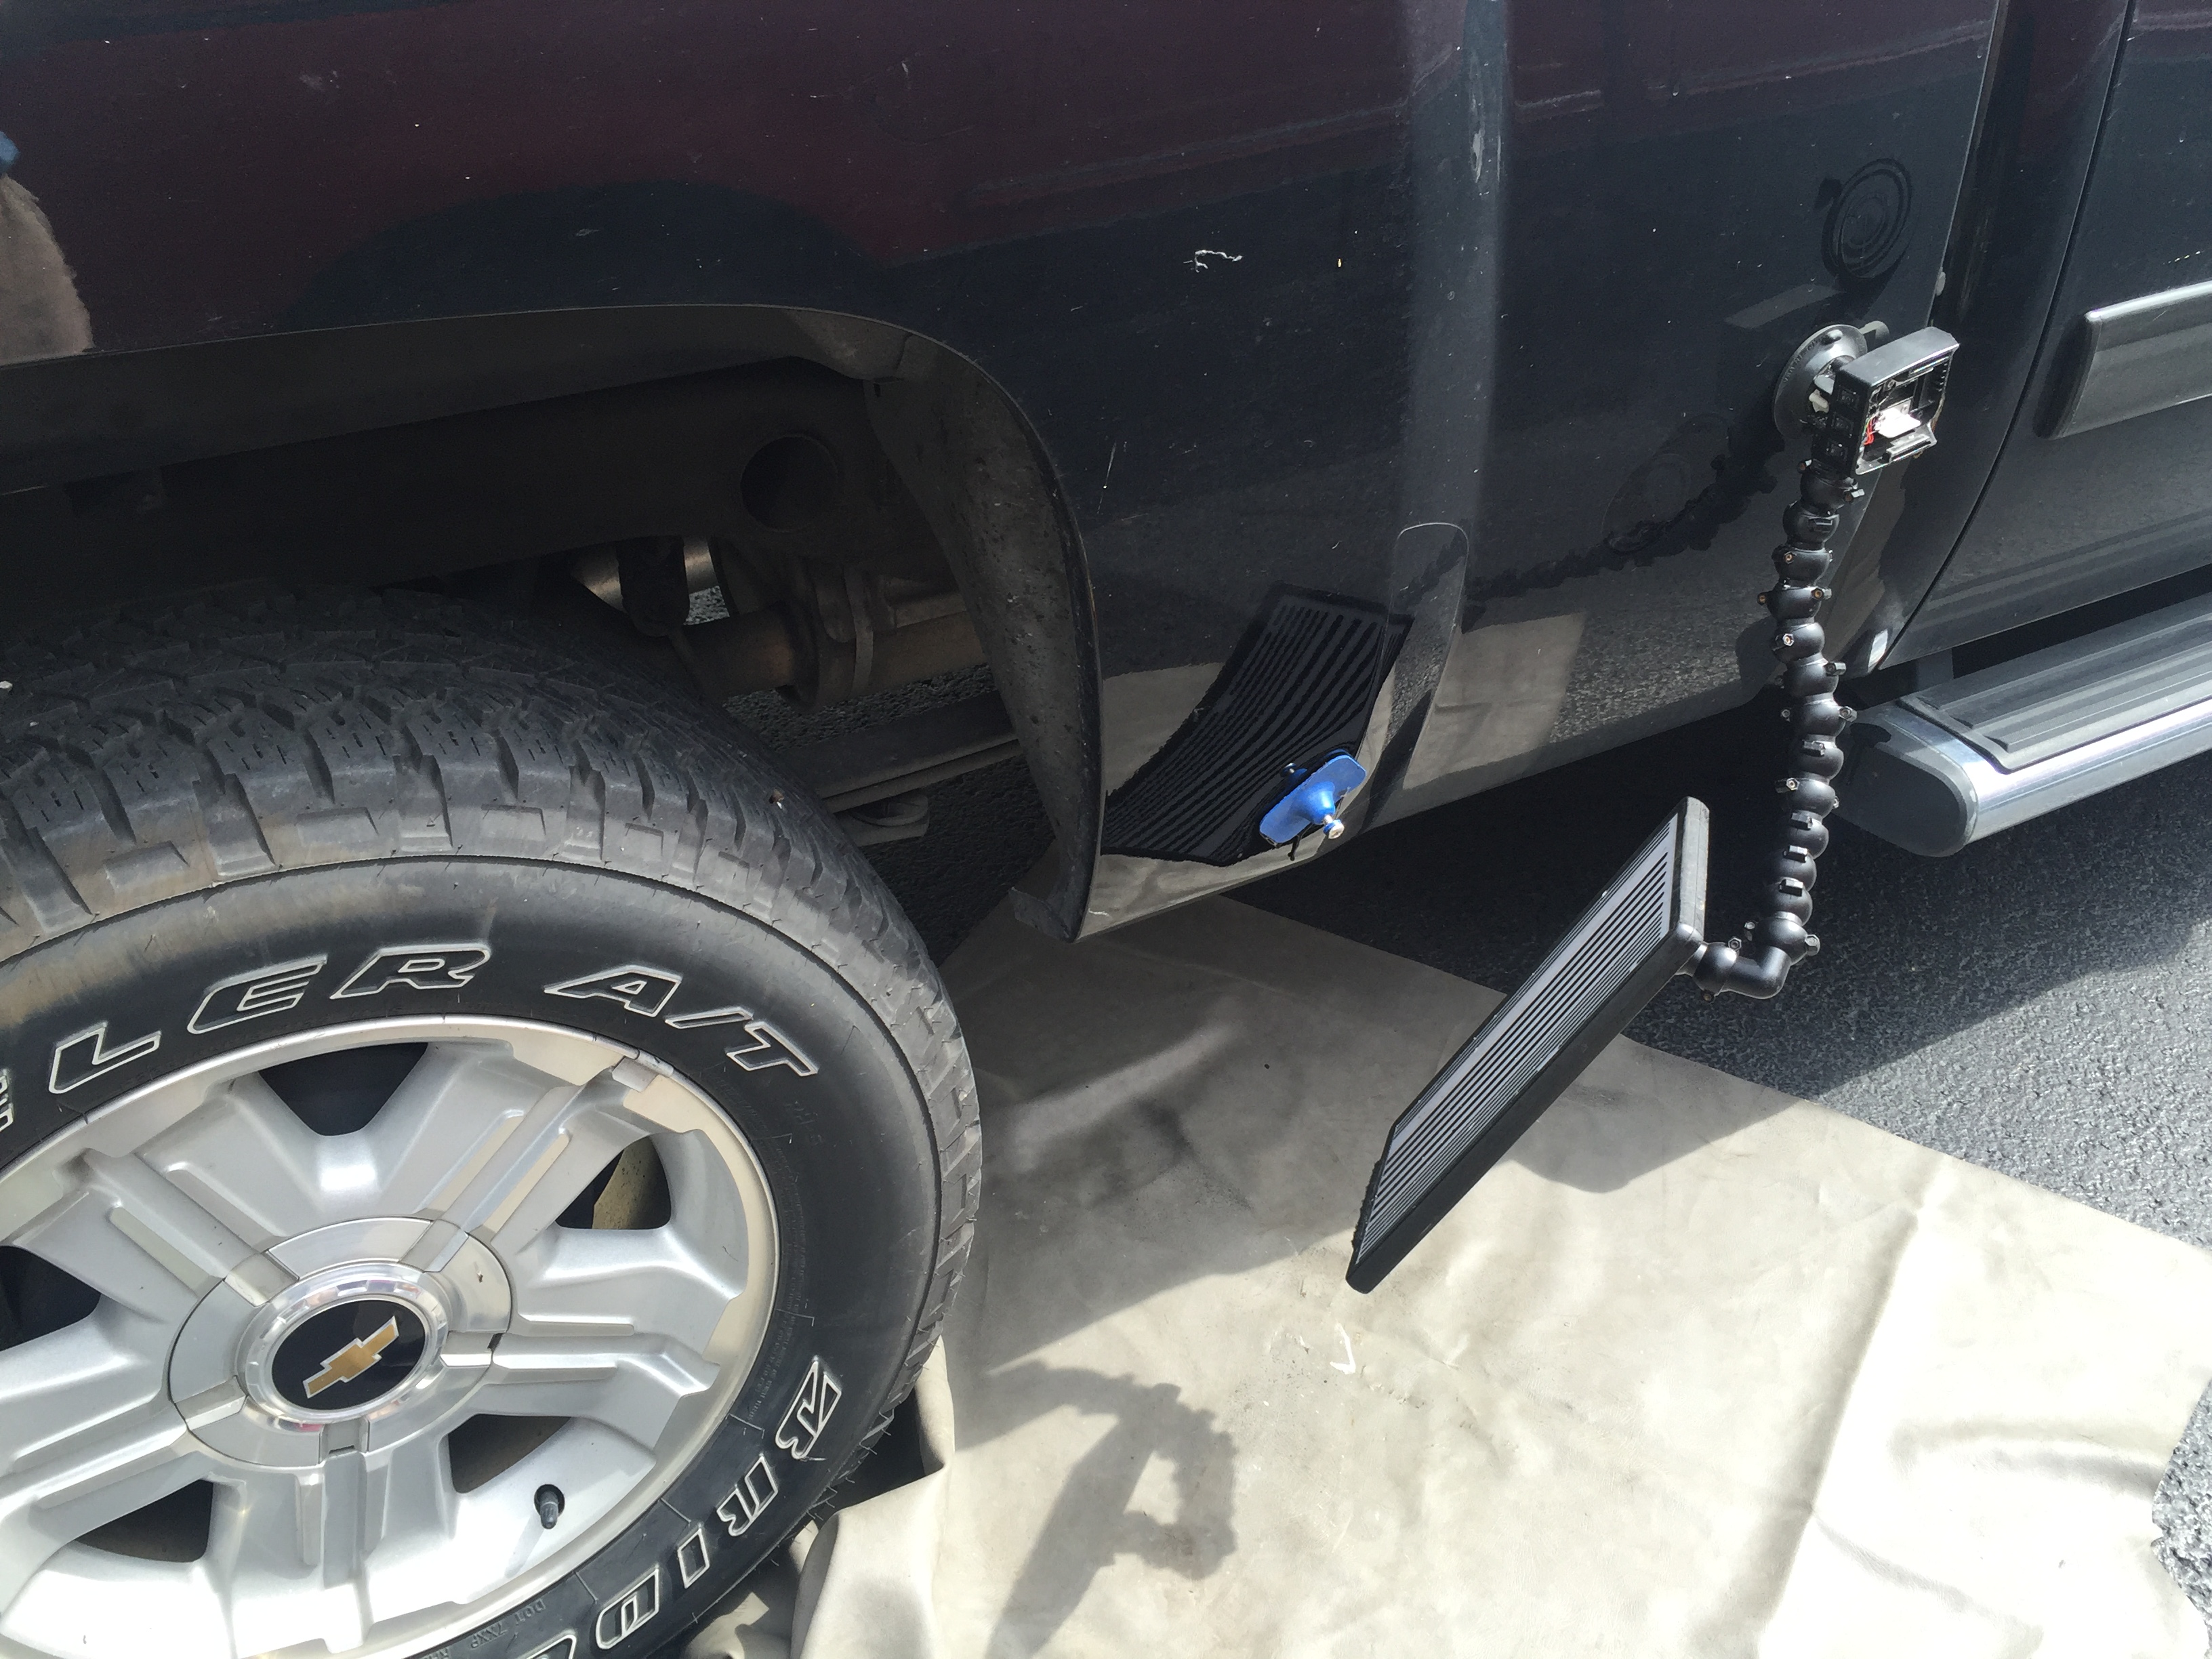 2011 Chevy Silverado Dent Repair, Michael Bocek out of Springfield, IL with https://217dent.com 217 dent